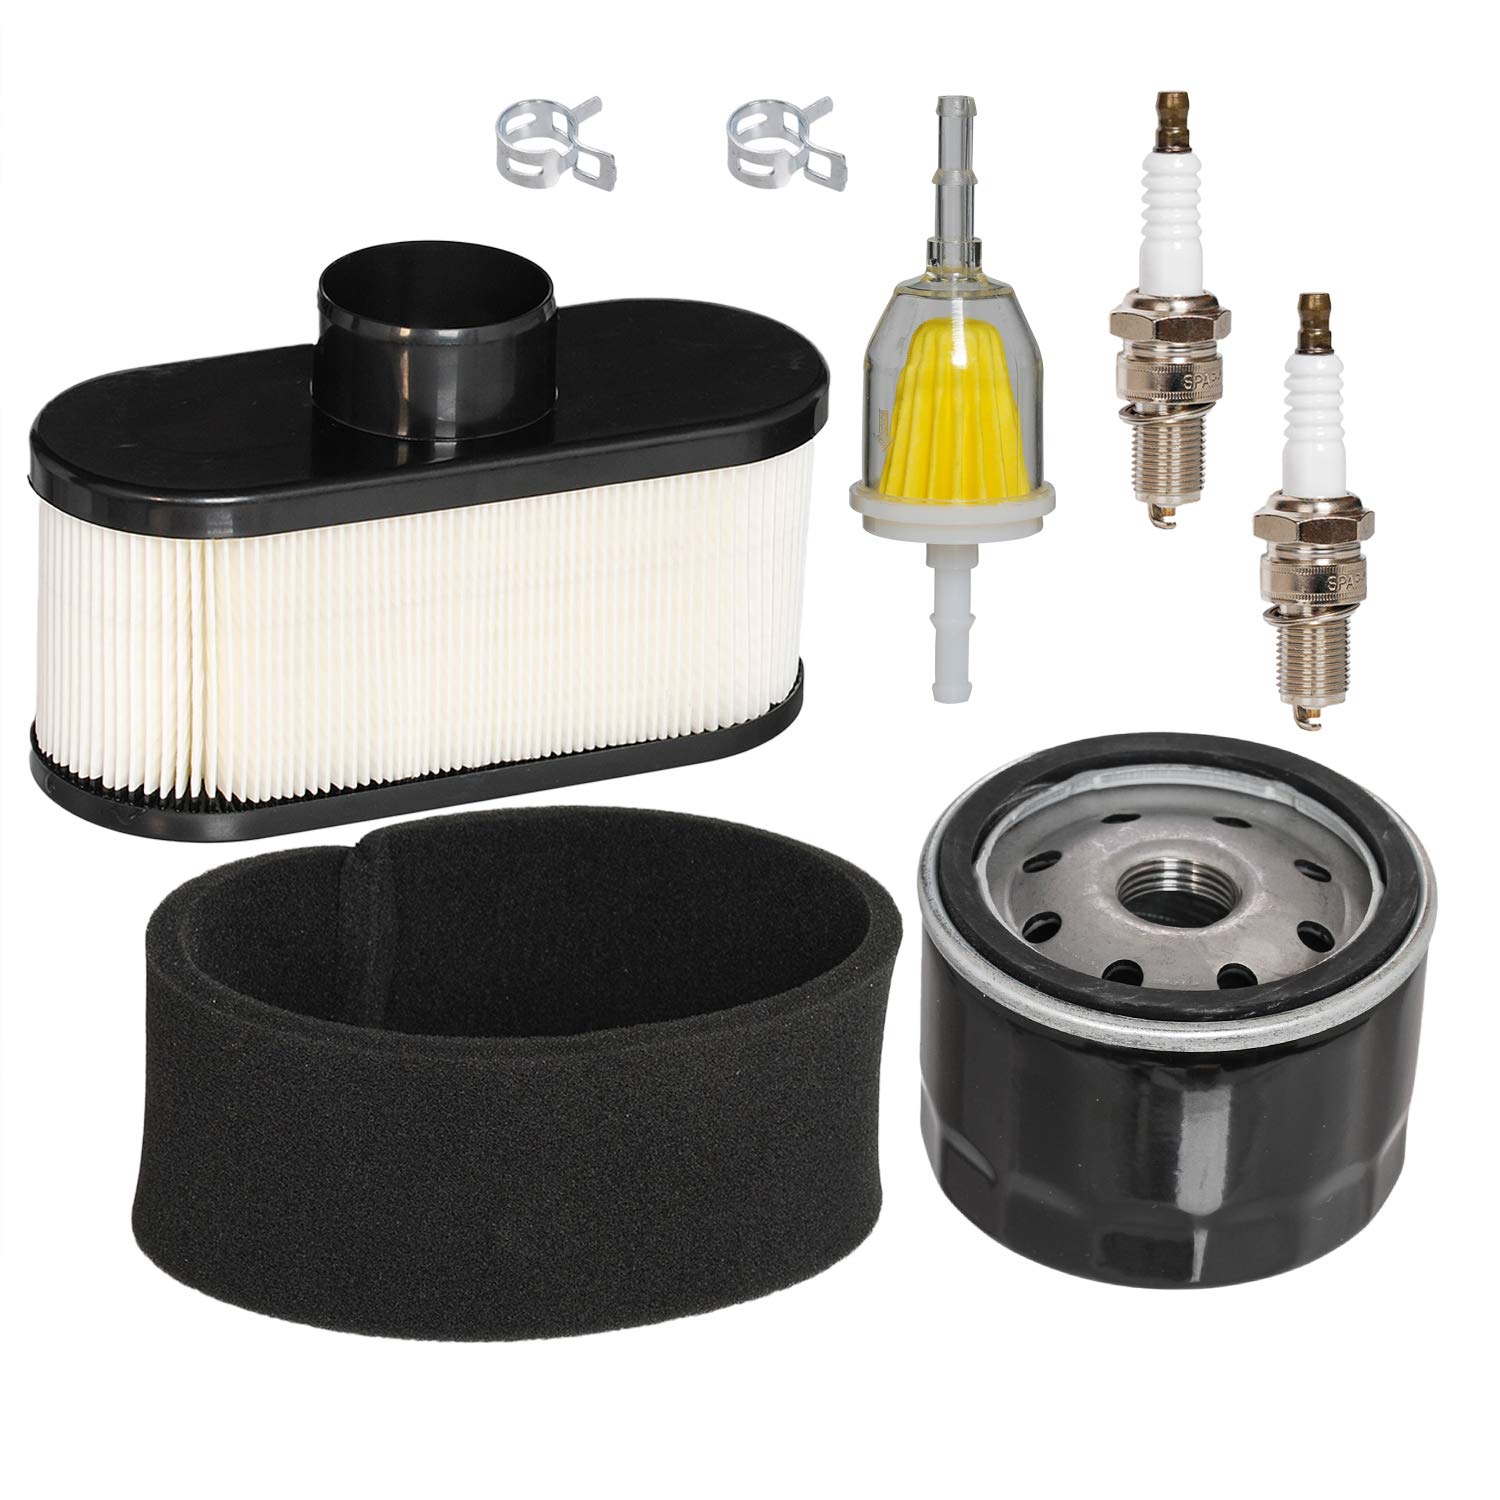 HIFROM Air Filter Pre Filter Cleaner Oil Fuel Filter Spark Plug Tune Up Kit Compatible with Cub Cadet LTX1050 RZT50 RZT54 Lawn Mower Engine 11013-7047 49065-7002 von hifrom